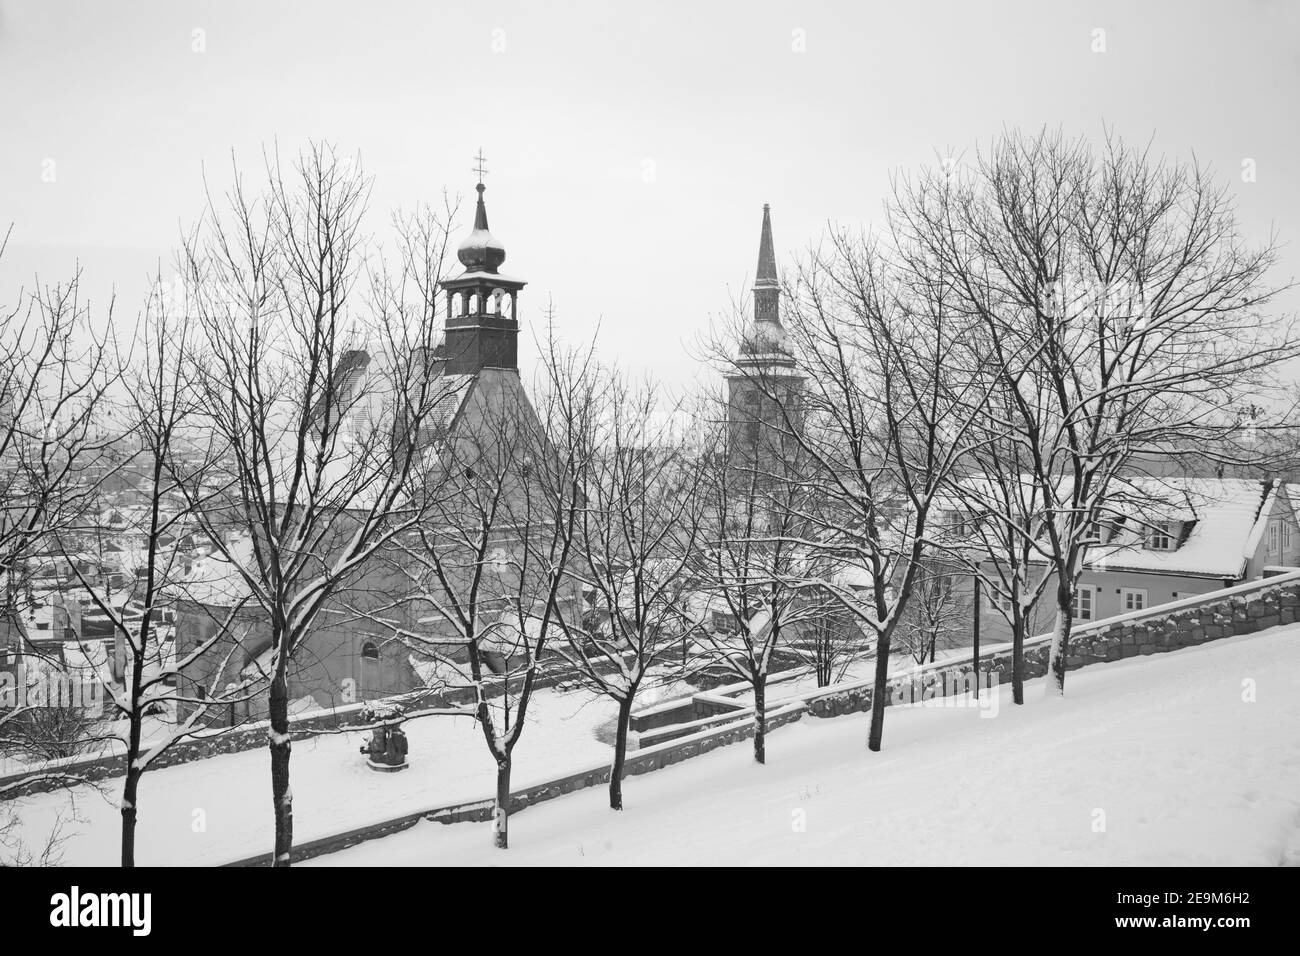 Bratislava - St. Nicholas church and Cathedral in the snowfall. Stock Photo